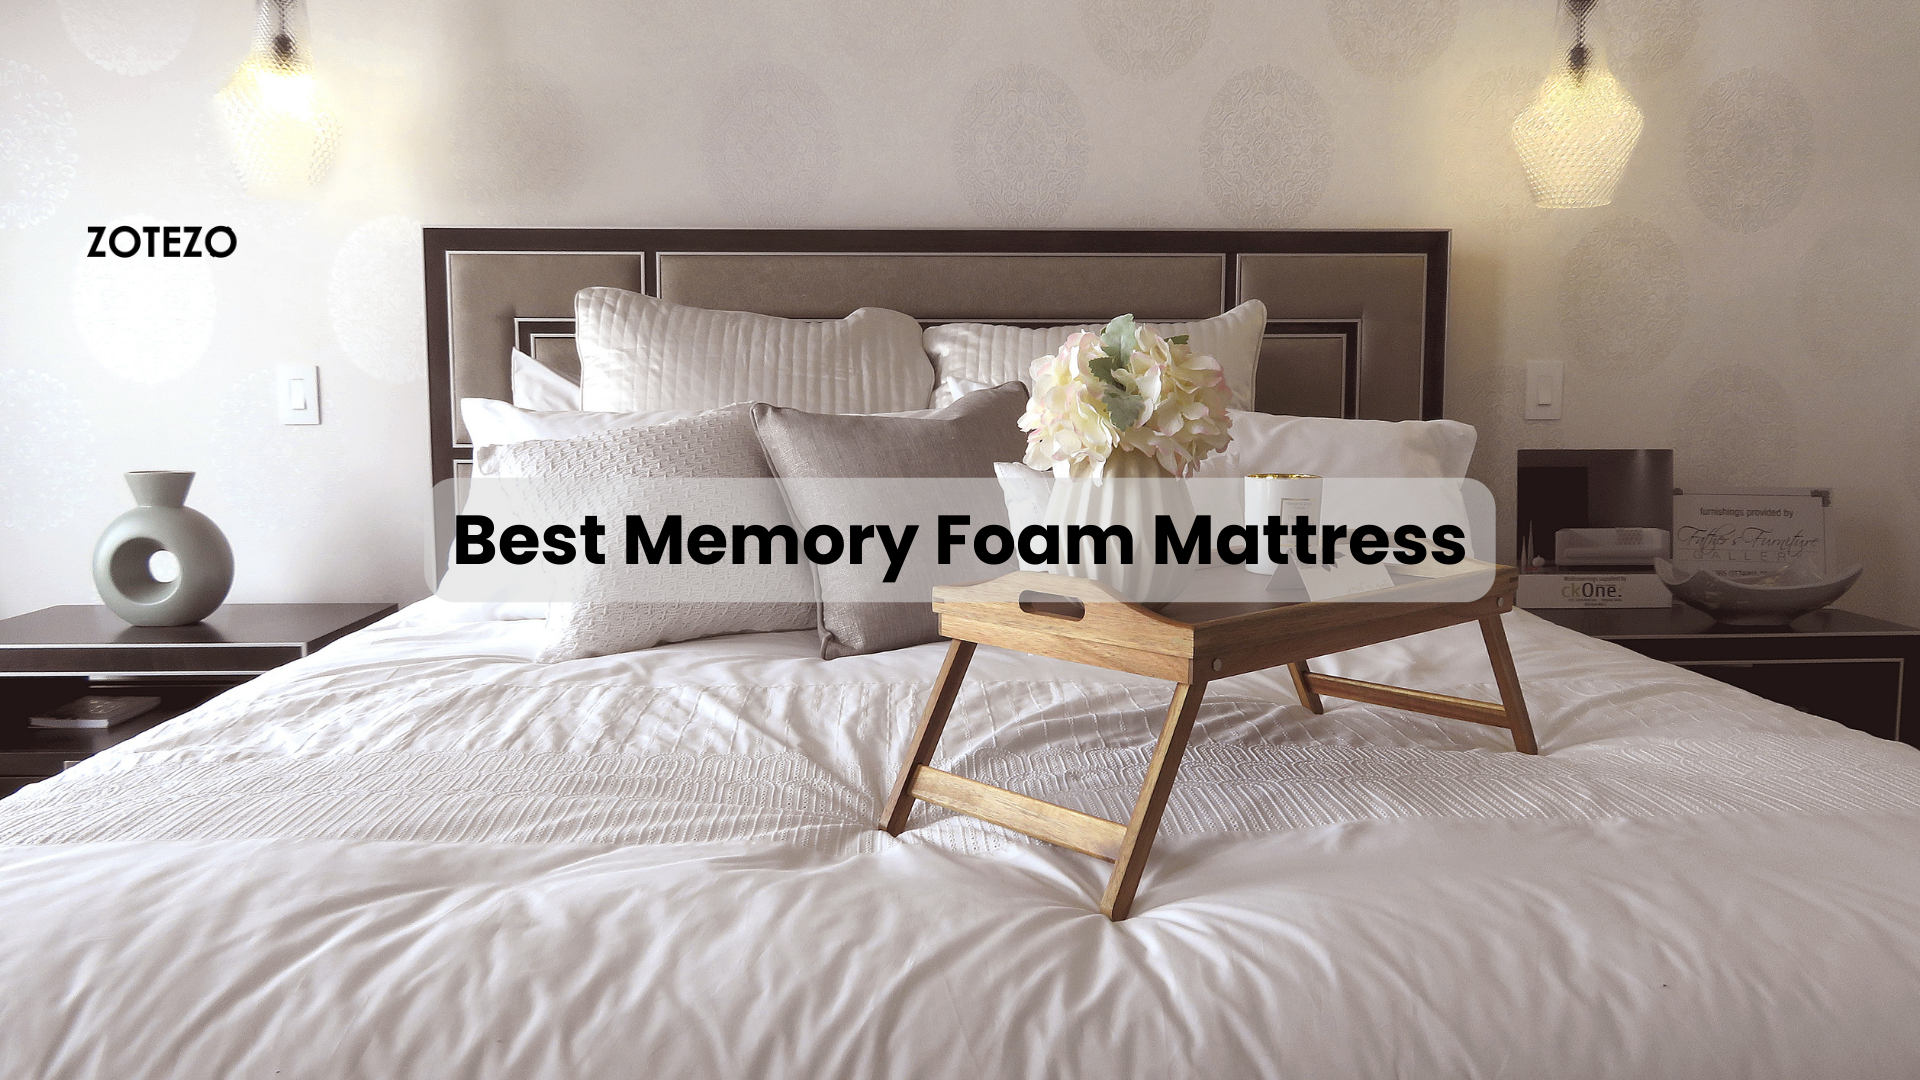 A Domino Editor's Honest Review of the Earthfoam Mattress